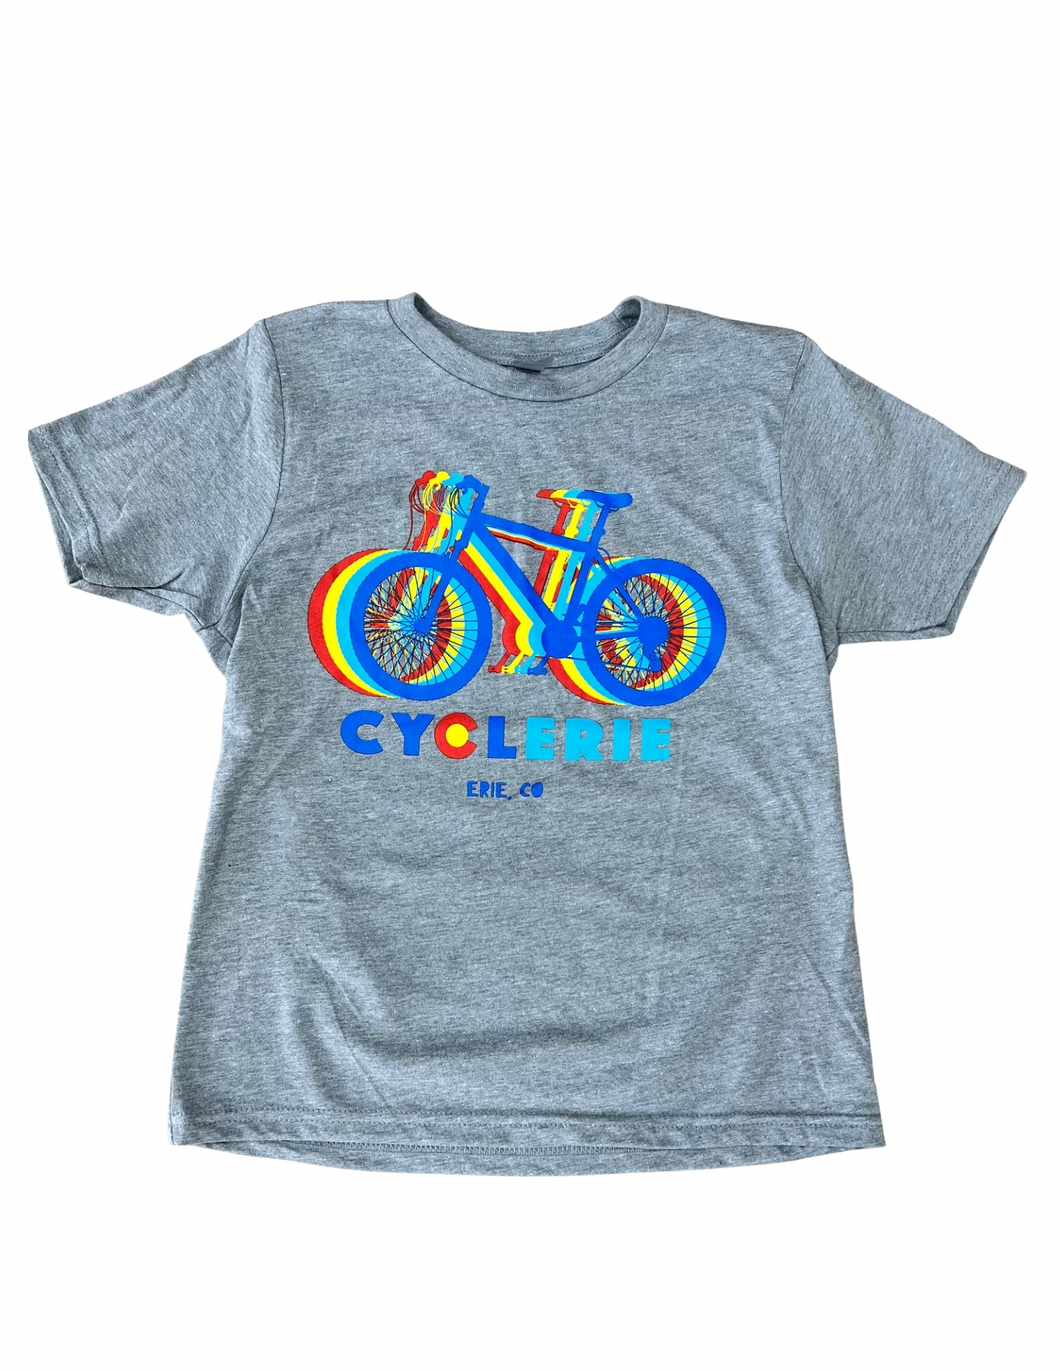 Next Level Cyclerie Kids T-Shirt